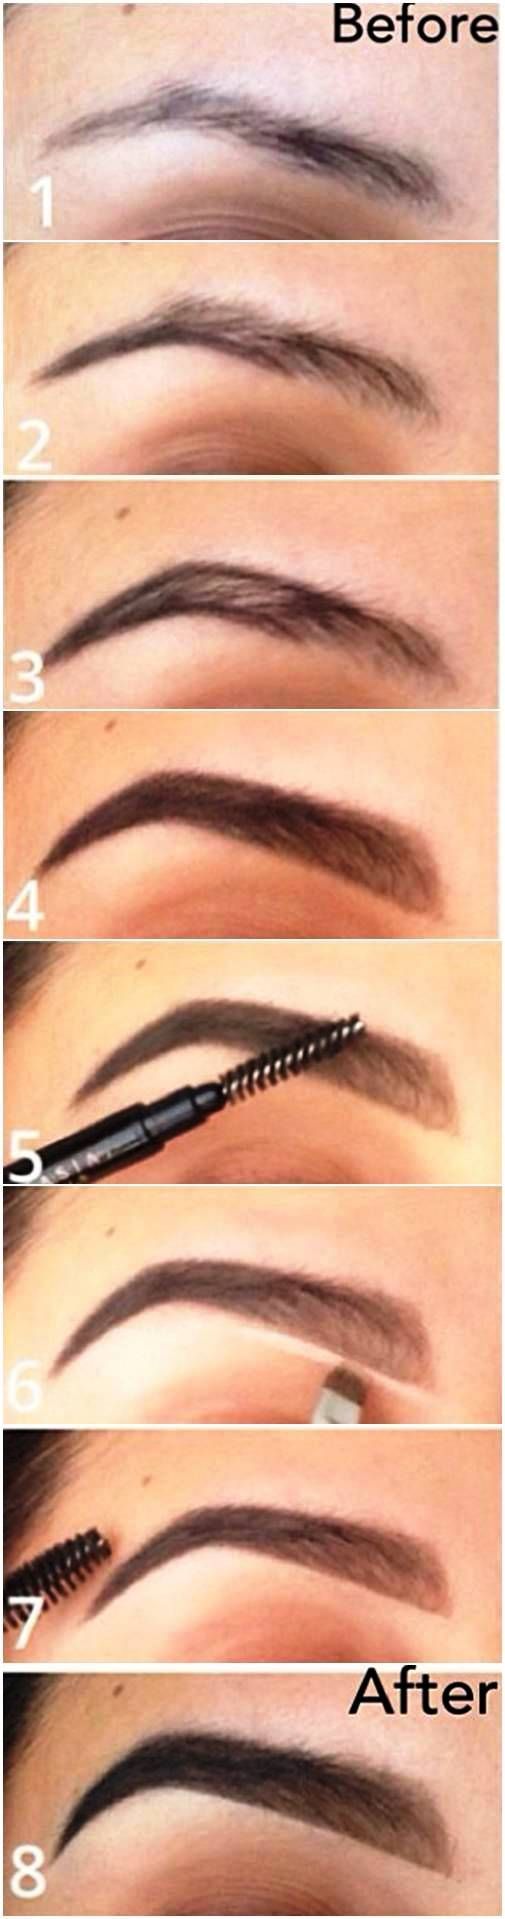 16 Makeup Tricks For Flawless Look Every Woman Should Know (8)